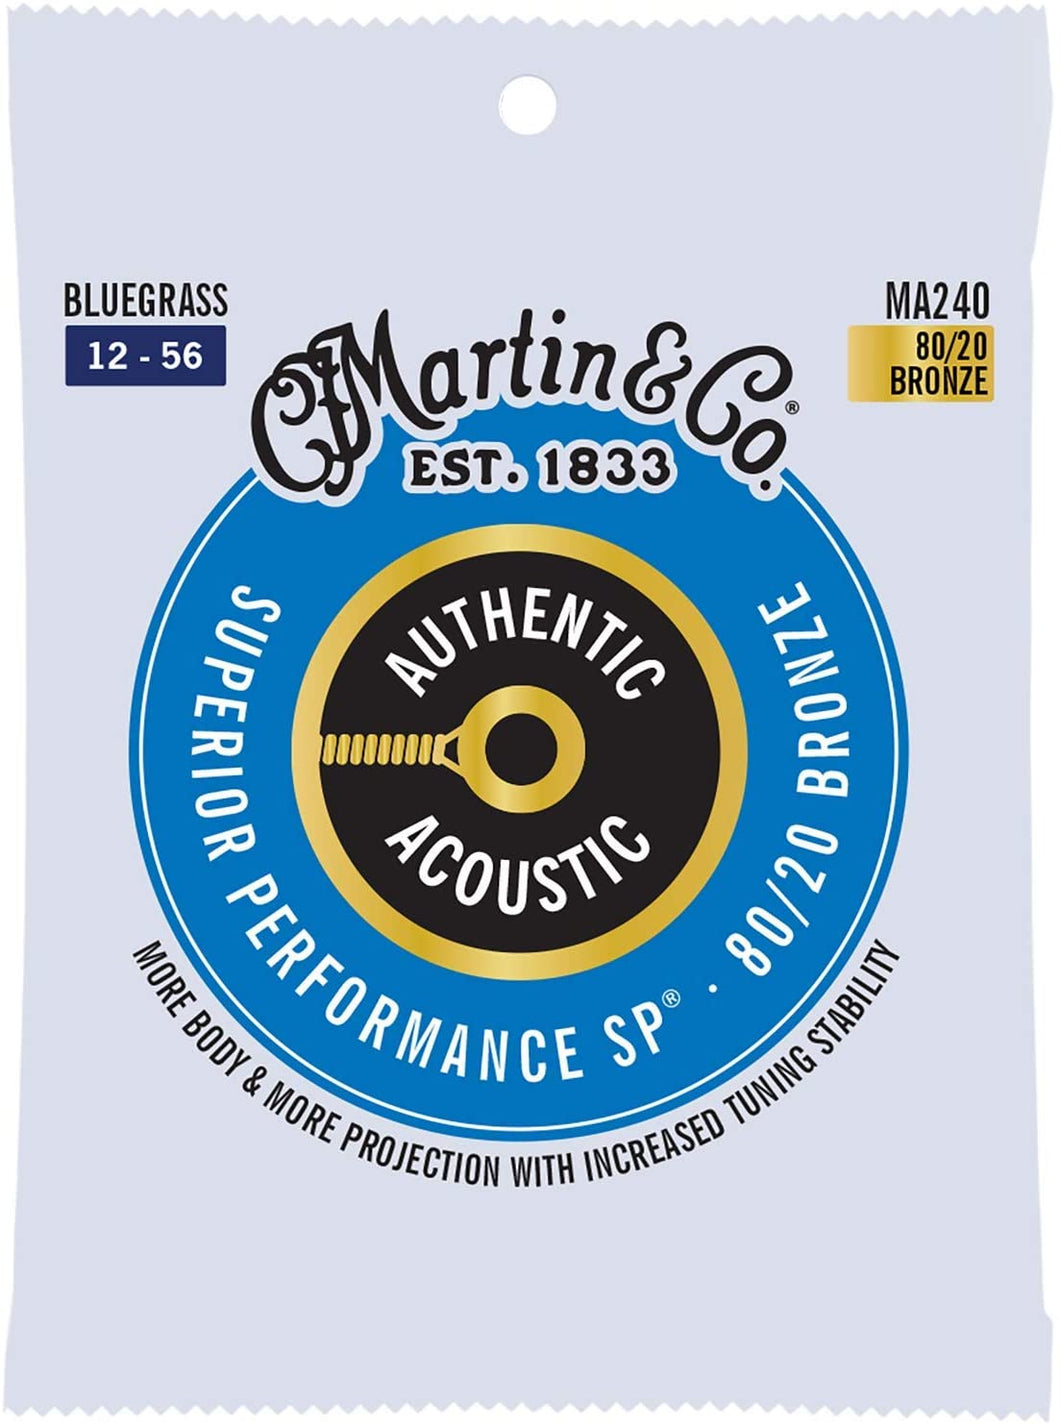 MARTIN MA240 BLUEGRASS 12 - 56 BRONZE 80/20 AUTHENTIC ACOUSTIC SUPERIOR PERFORMANCE SP® GUITAR STRINGS